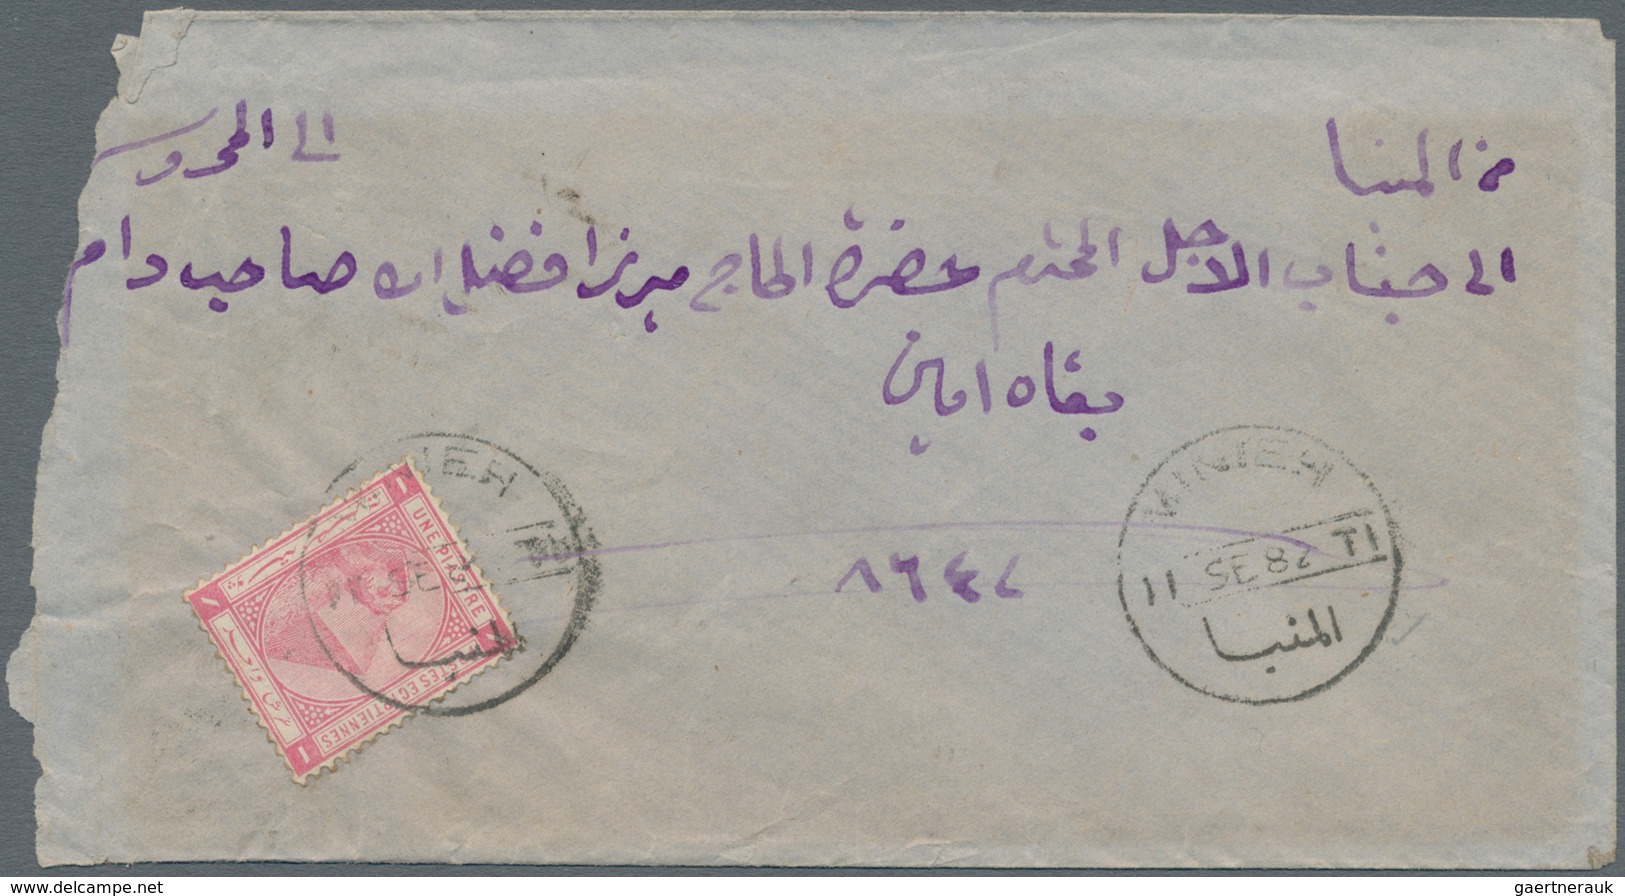 Ägypten: 1880/1888, Lot Of Eight Covers Franked With Pyramid/Sphinx Issues, Some Postal Wear/roughly - 1866-1914 Khedivato De Egipto